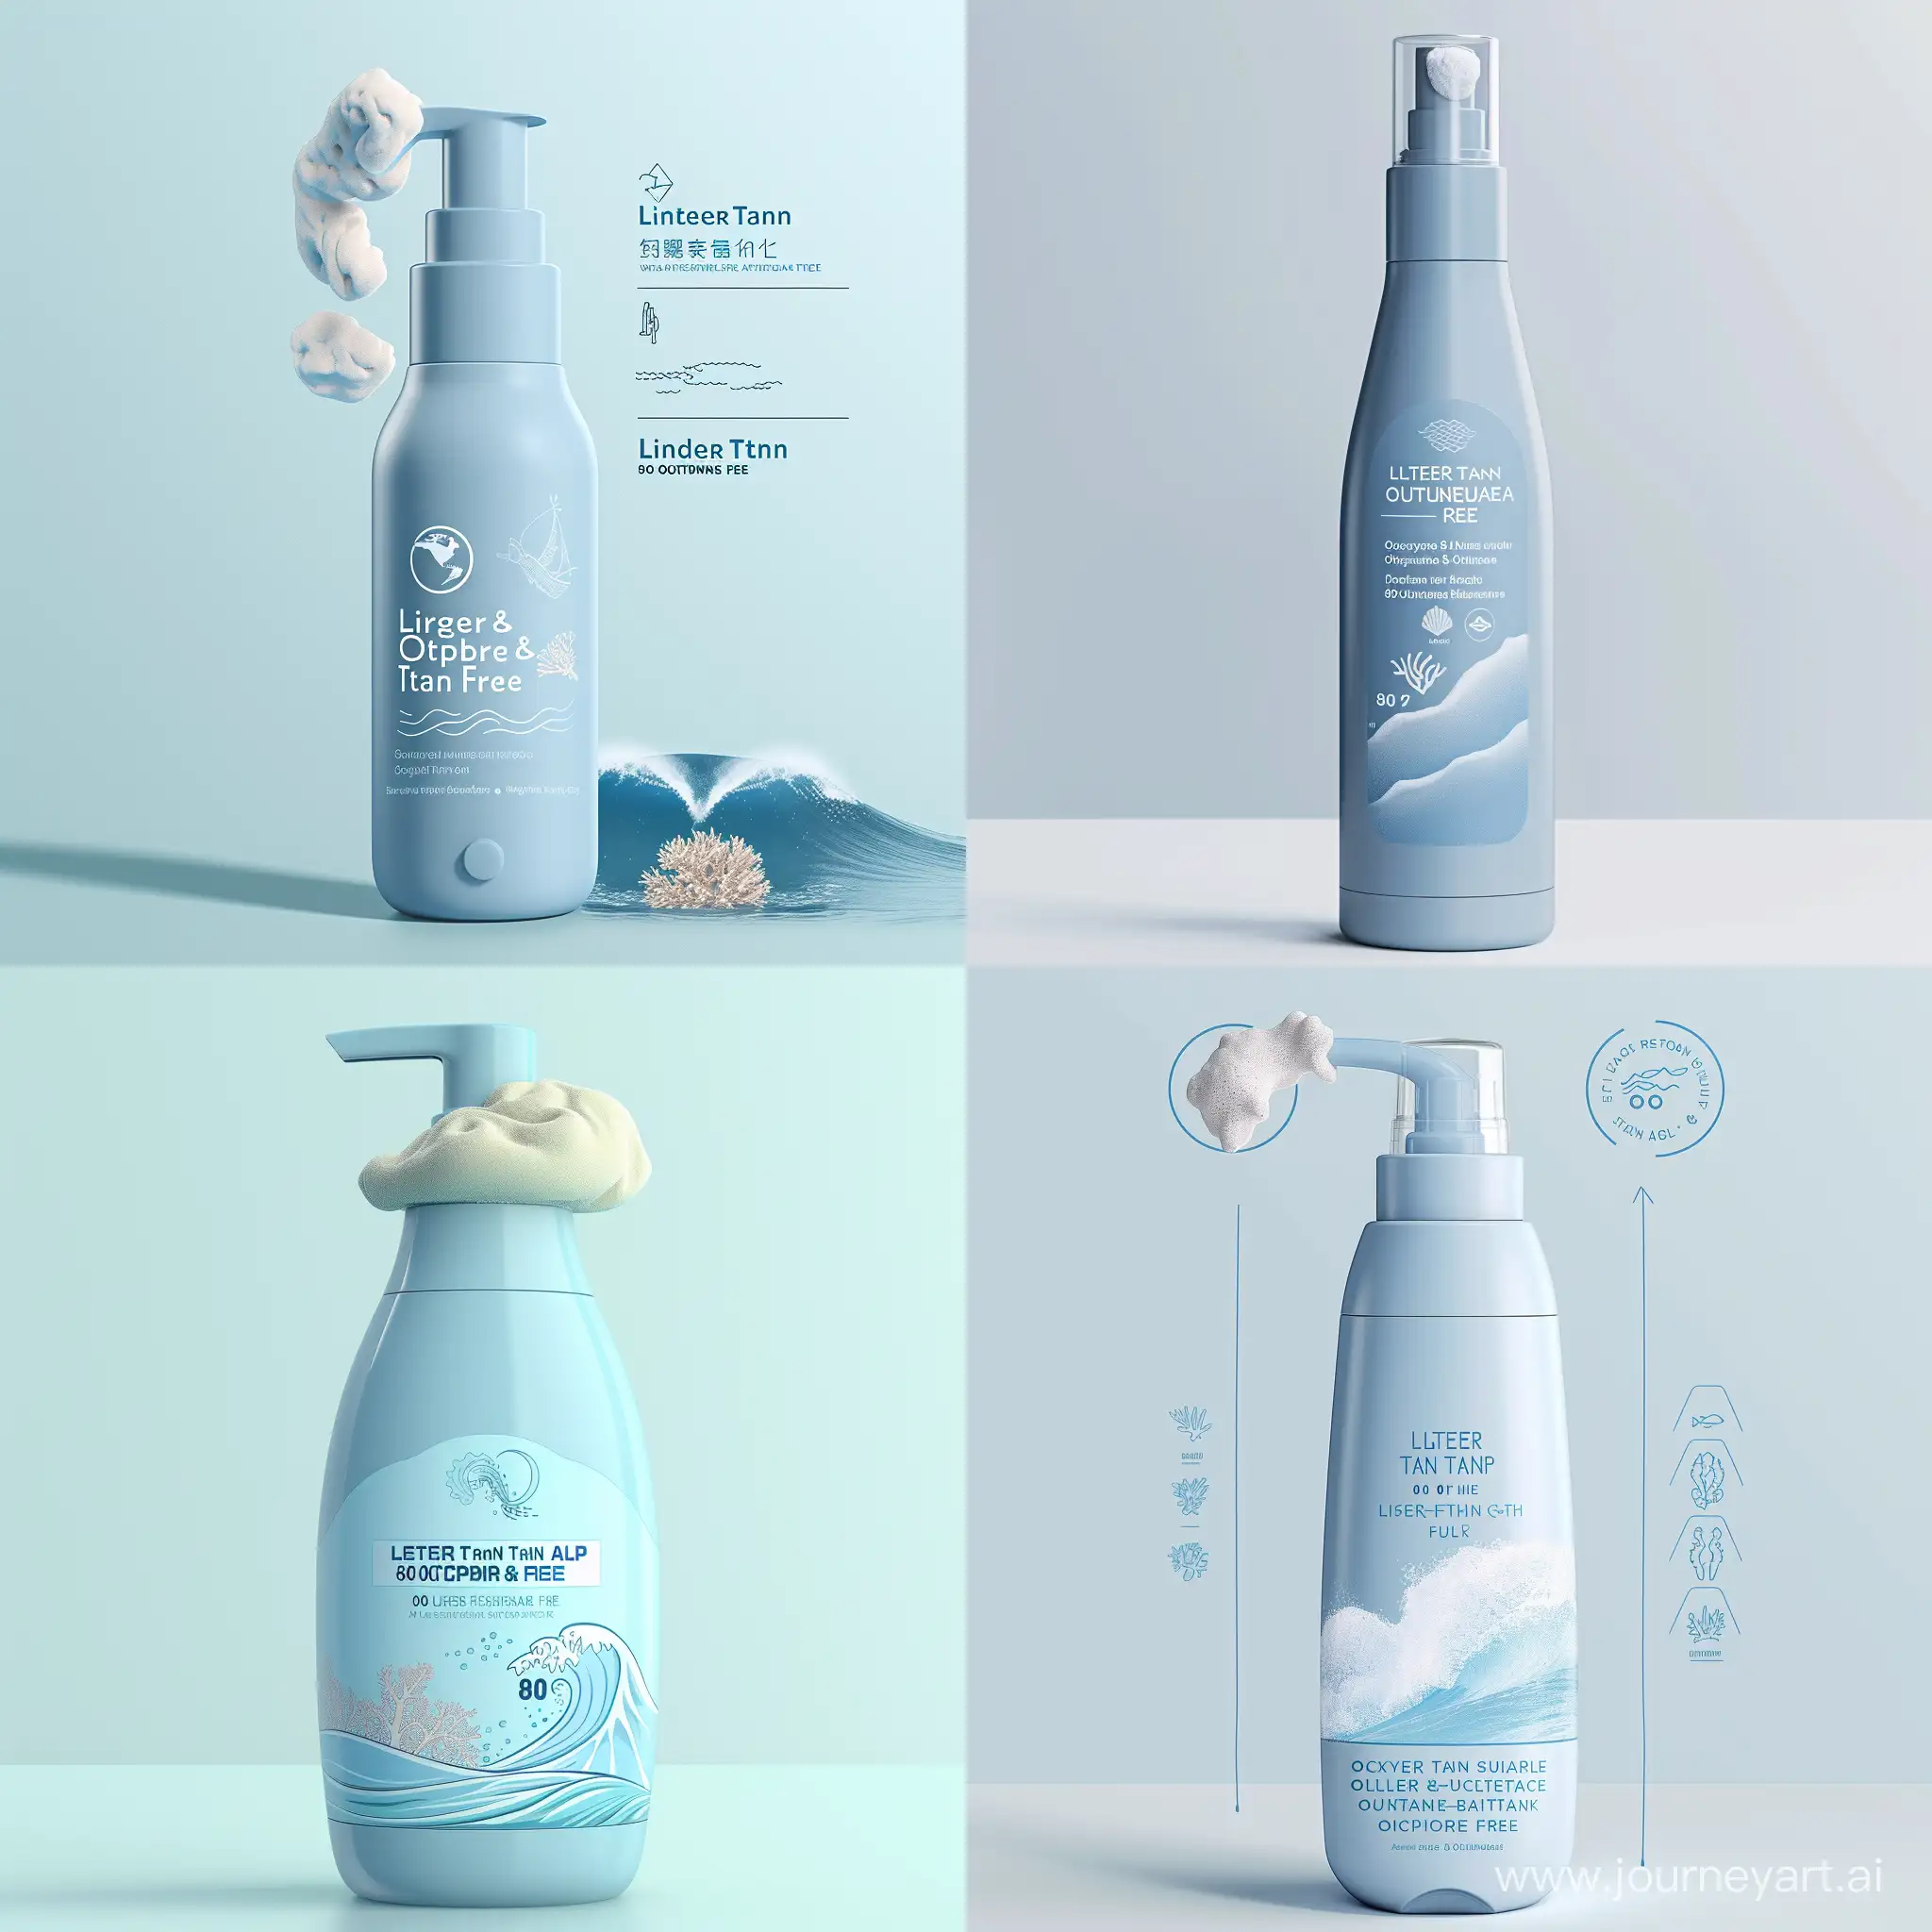 imagine a sleek, baby blue bottle. The bottle should have a dispenser for foam. The label on the bottle  should be "Lighter-Than-Air" , "Water-Resistant (80 minutes)," "Oxybenzone & Octinoxate free." Additionally, you could include imagery or symbols representing the product's eco-friendly, cruelty-free, and vegan attributes. Also add a small image of a wave and a coral reef